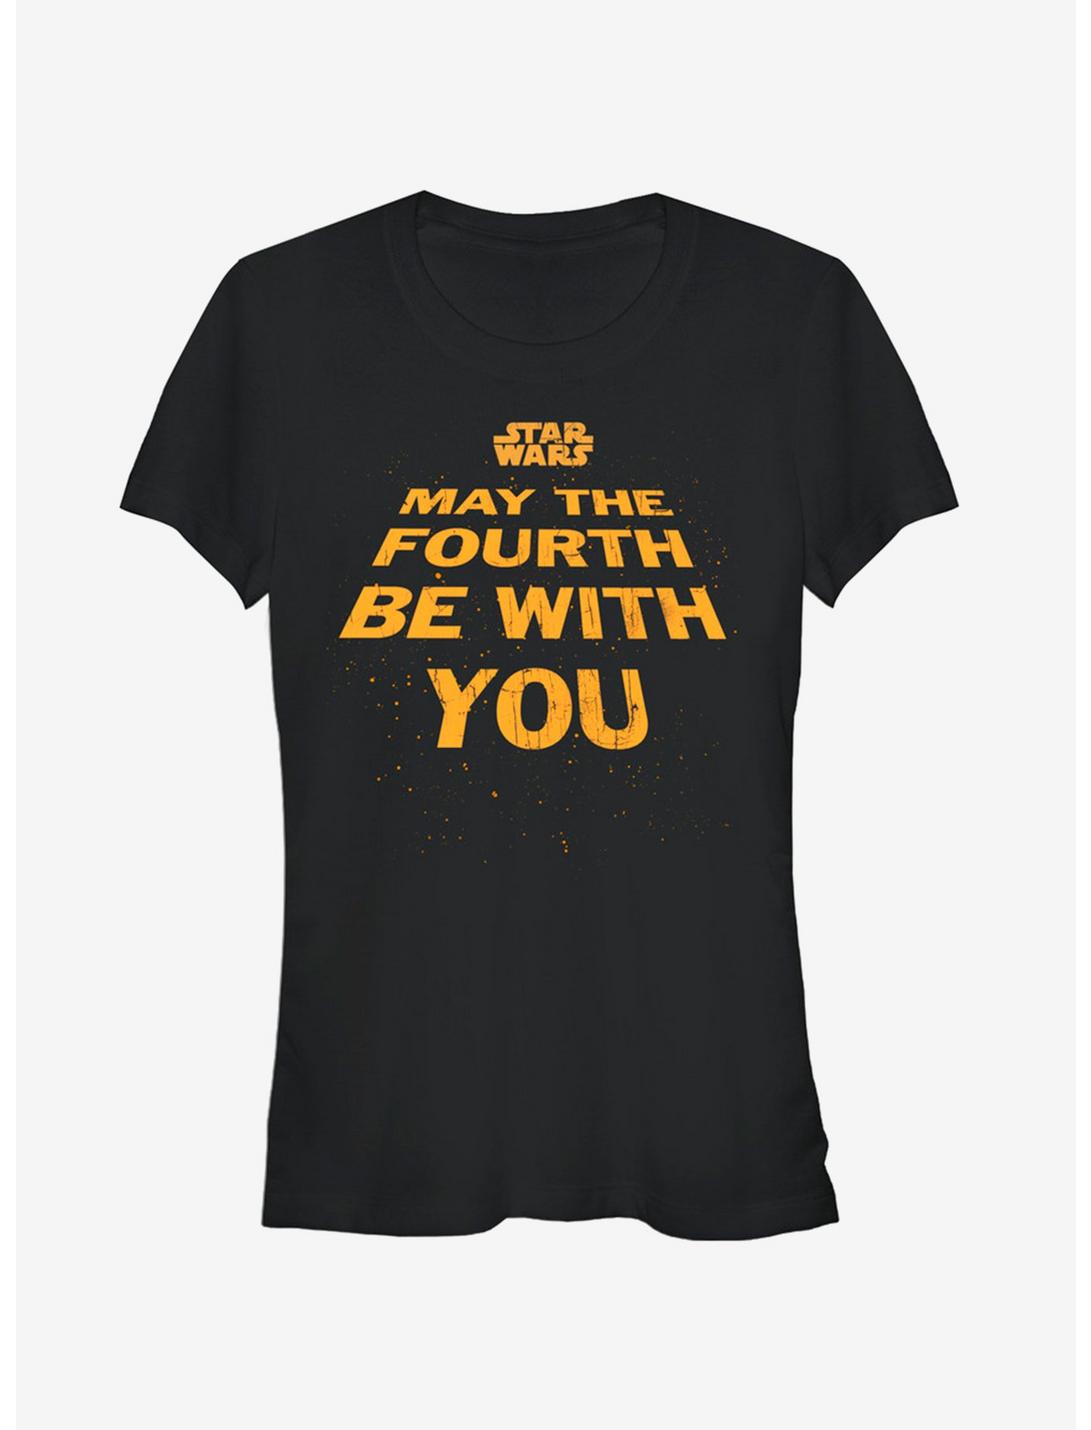 Star Wars May the Fourth Title Girls T-Shirt, BLACK, hi-res